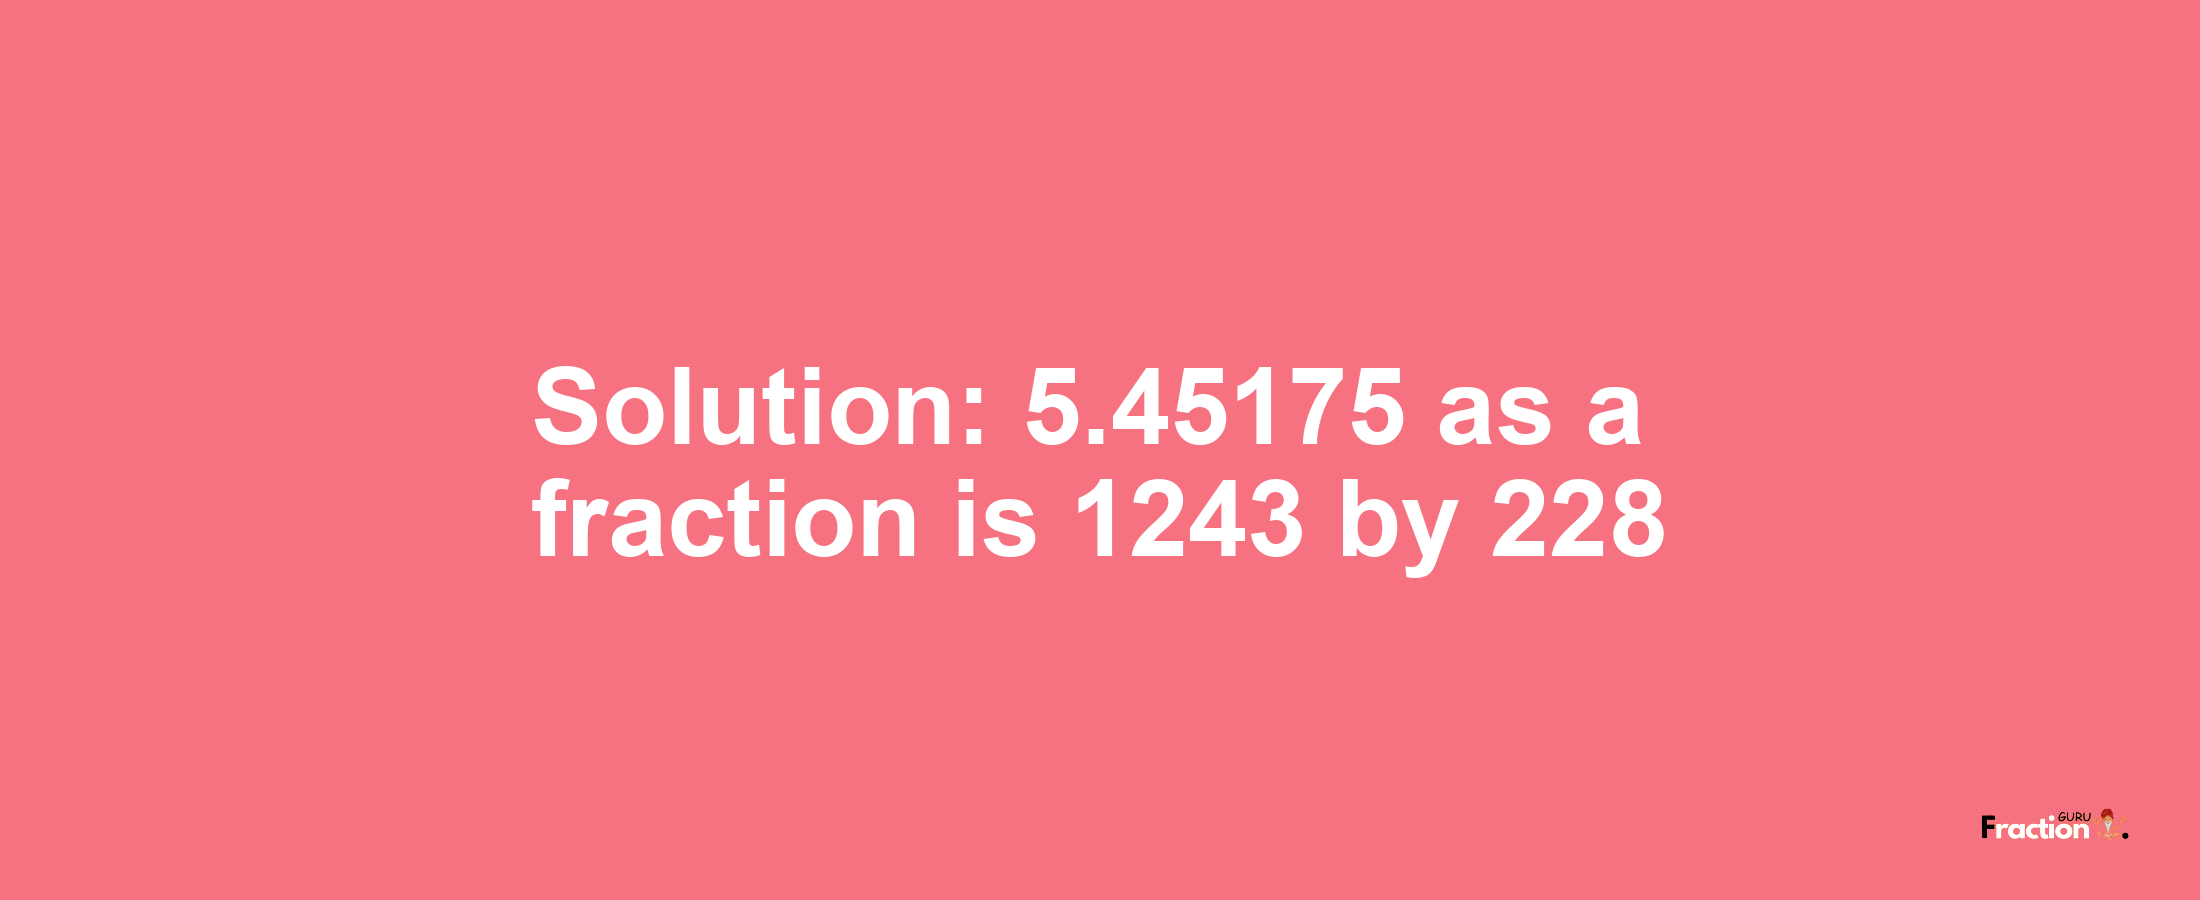 Solution:5.45175 as a fraction is 1243/228